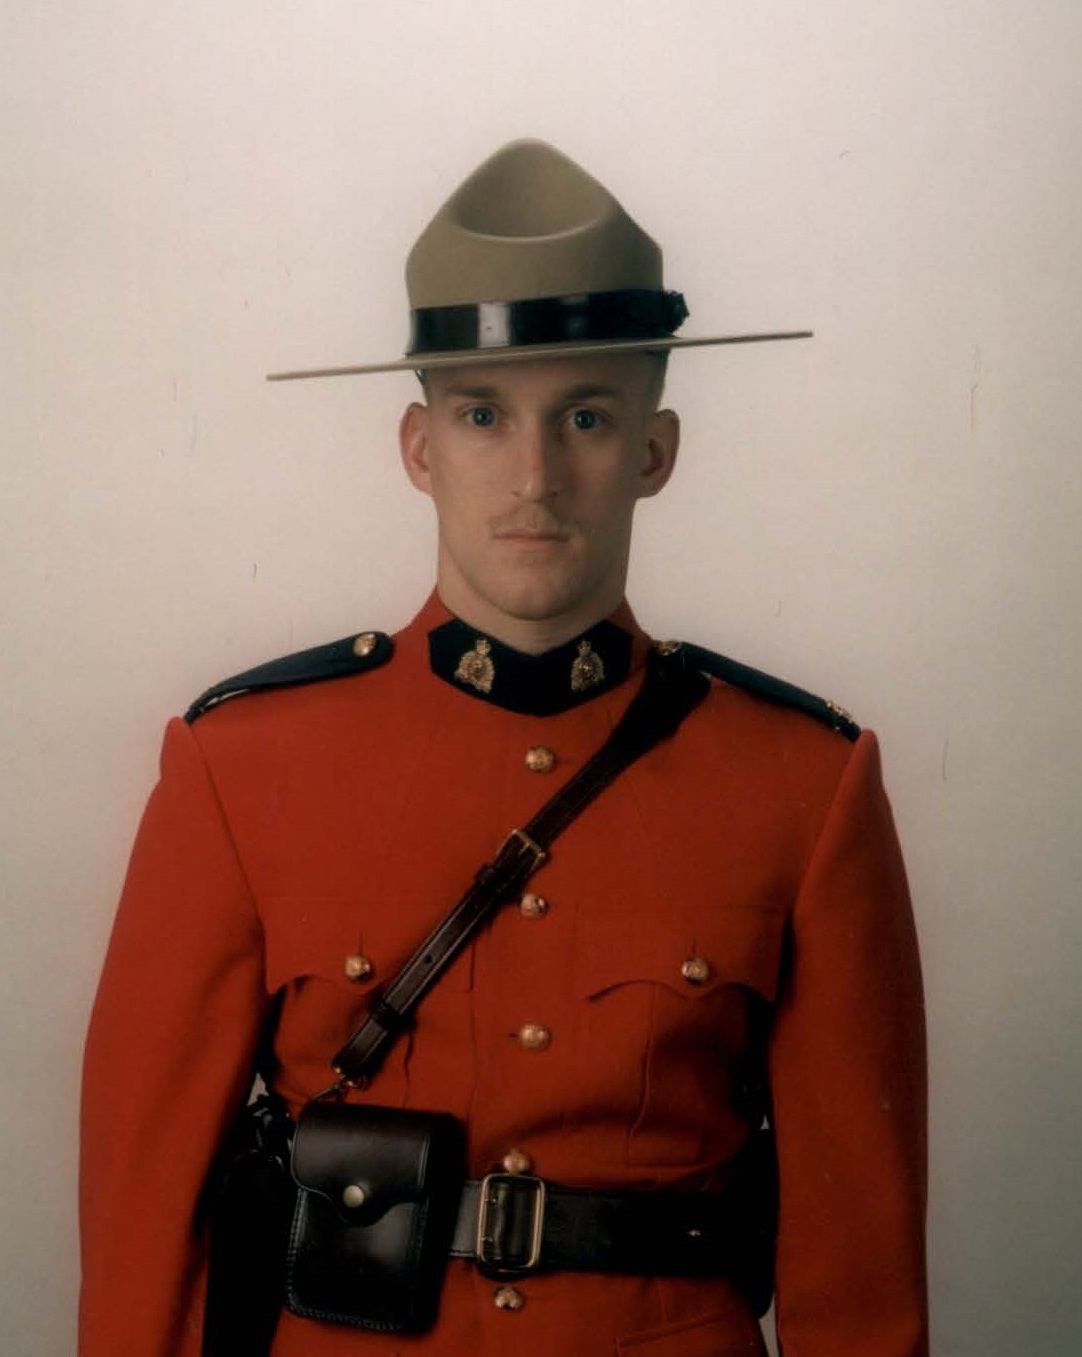 An RCMP regimental funeral will take place Wednesday in Moncton for Const. Francis Deschênes, who was killed on Sept. 13 while helping some motorists change a tire on the side of a New Brunswick highway.